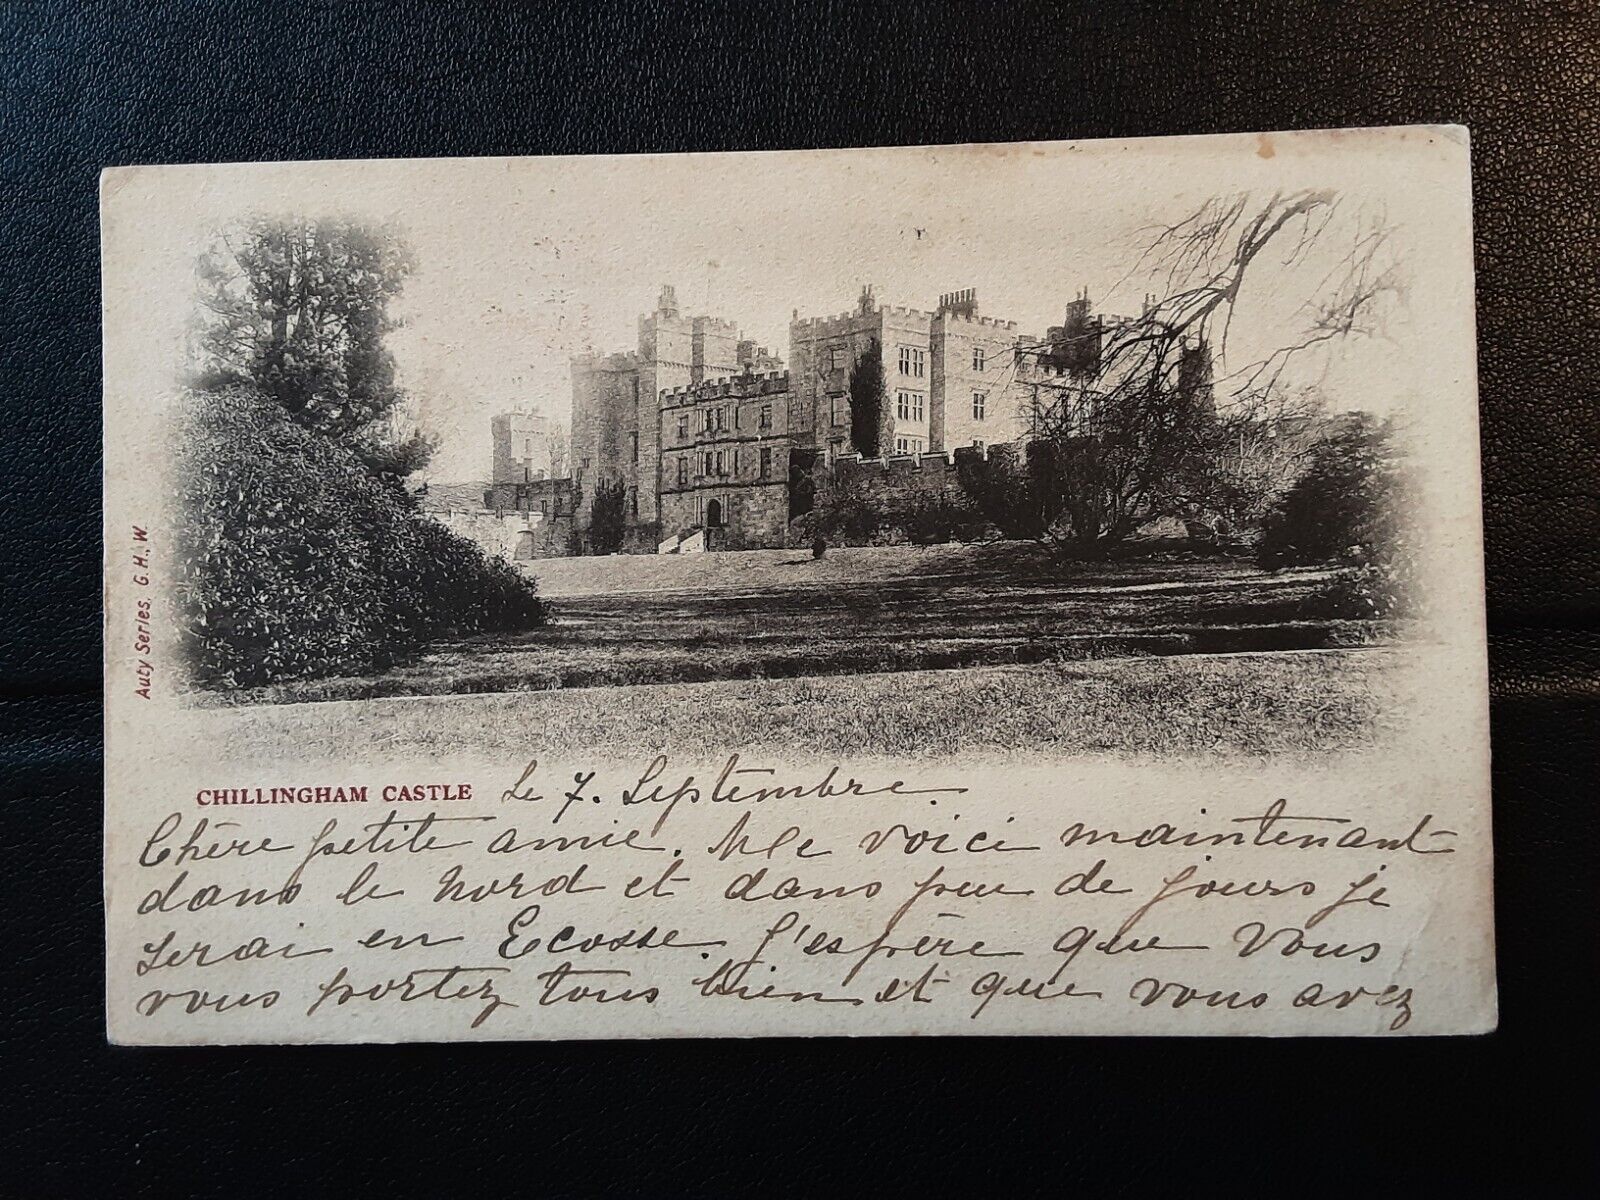 House Clearance - Old Auty series service of Chillingham Castle, Northumberland posted 1903